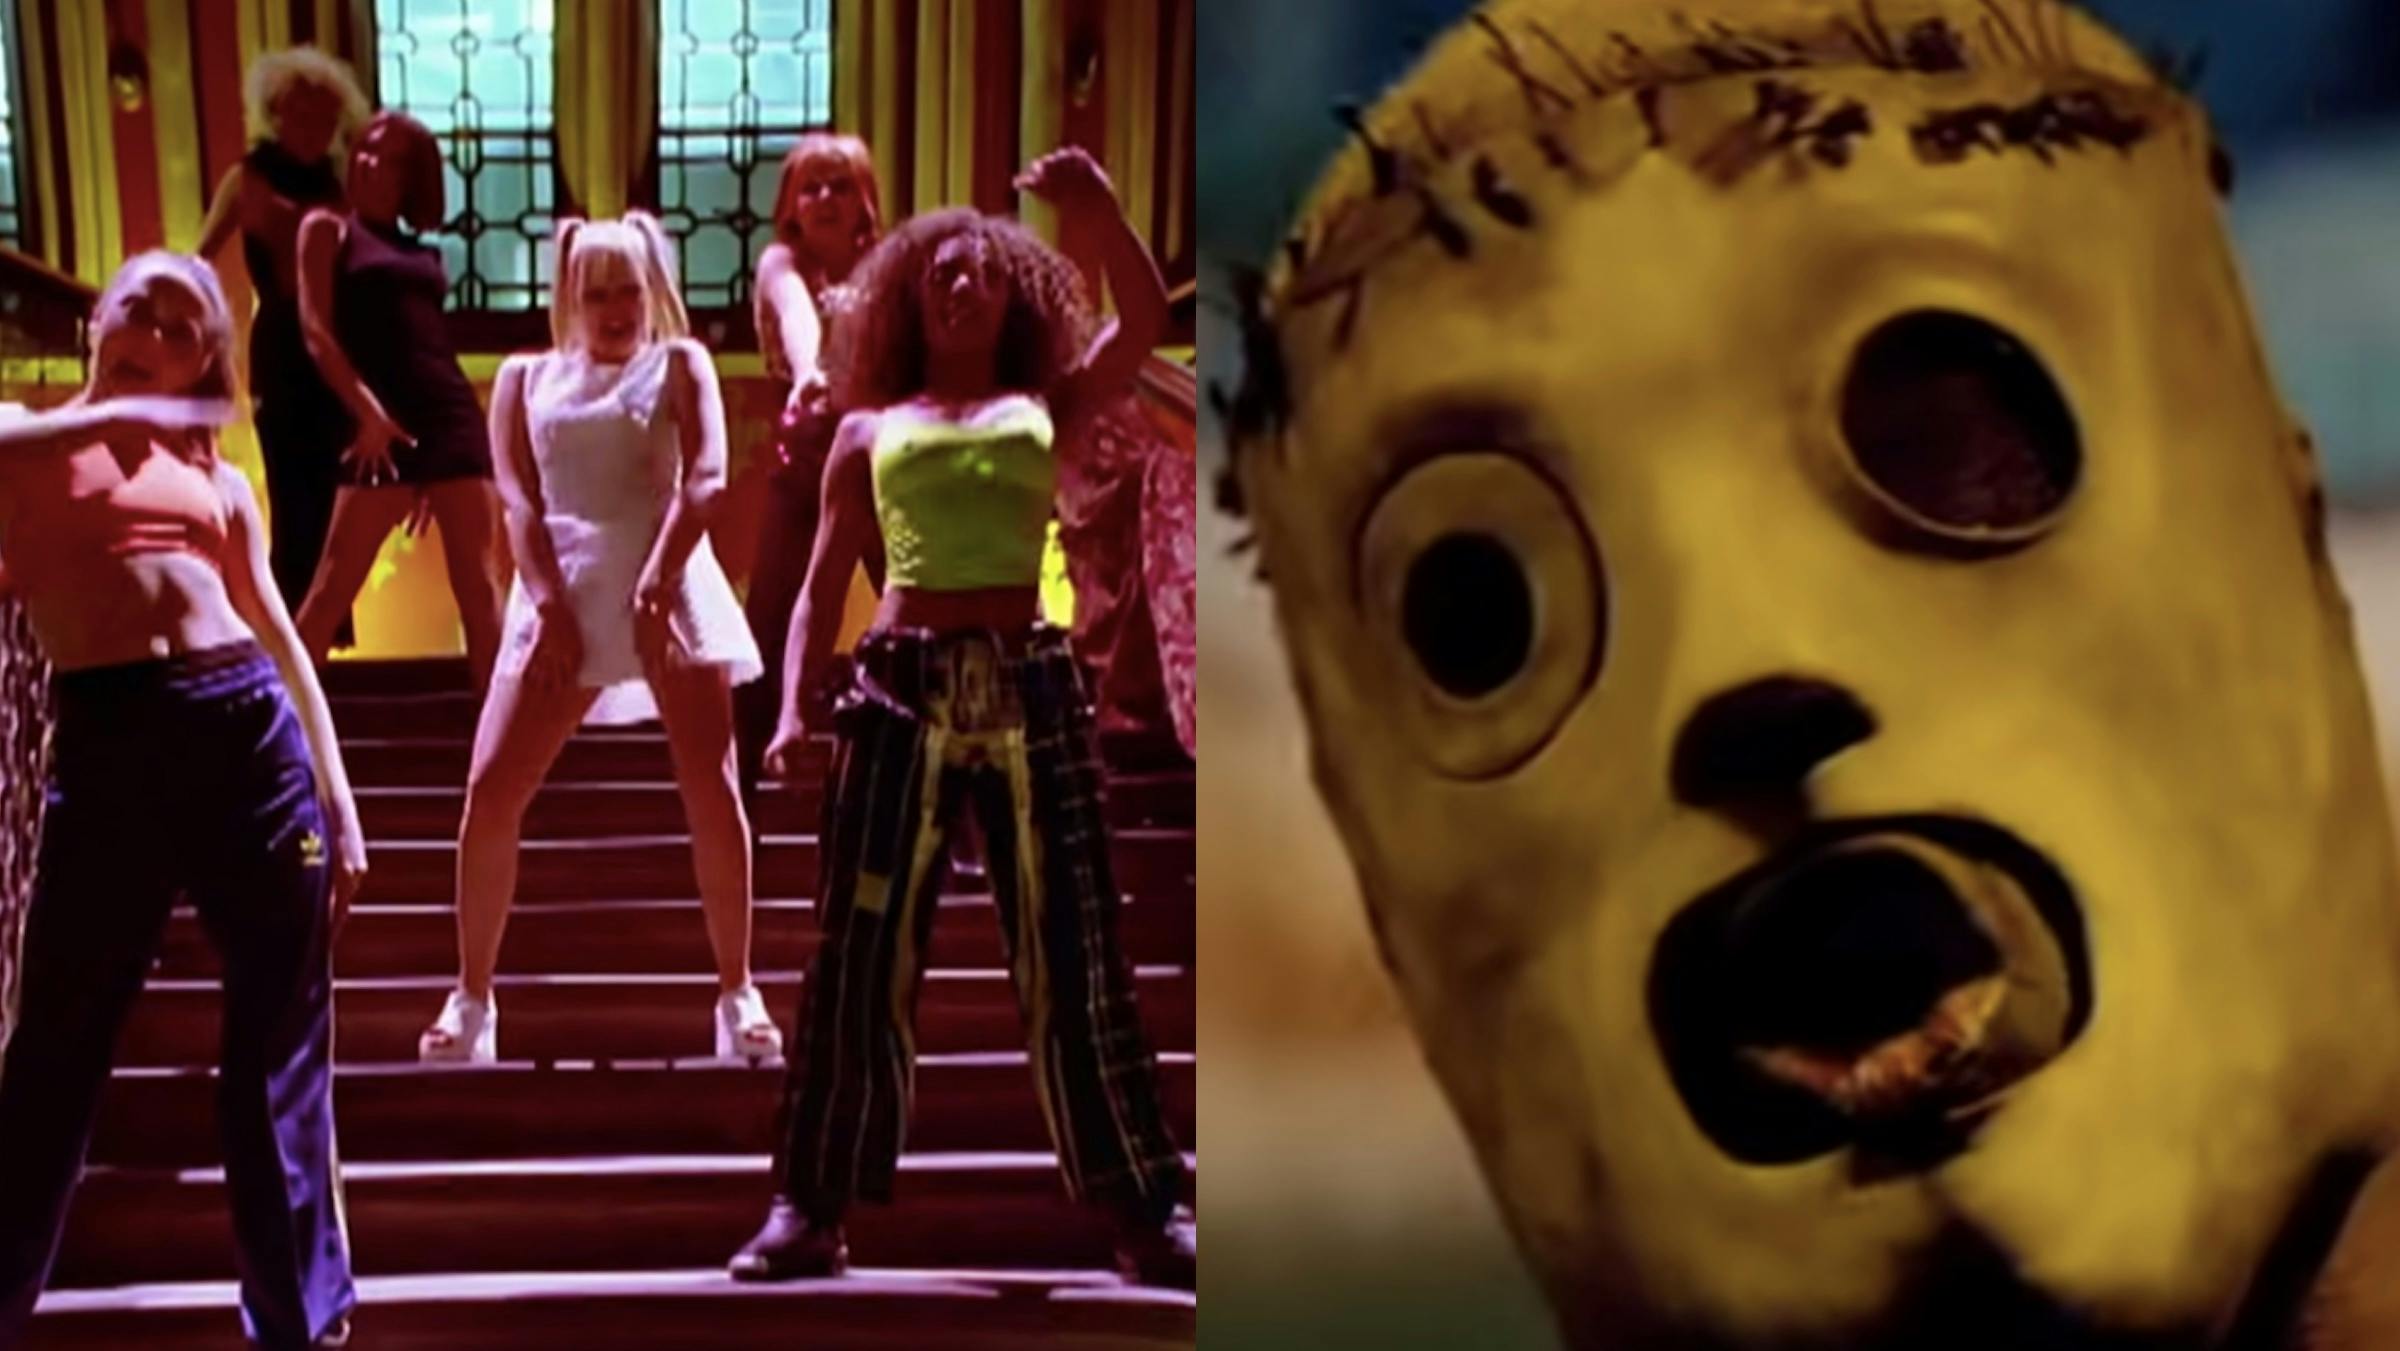 This Slipknot/Spice Girls Mash-Up Is Uncomfortably Awesome